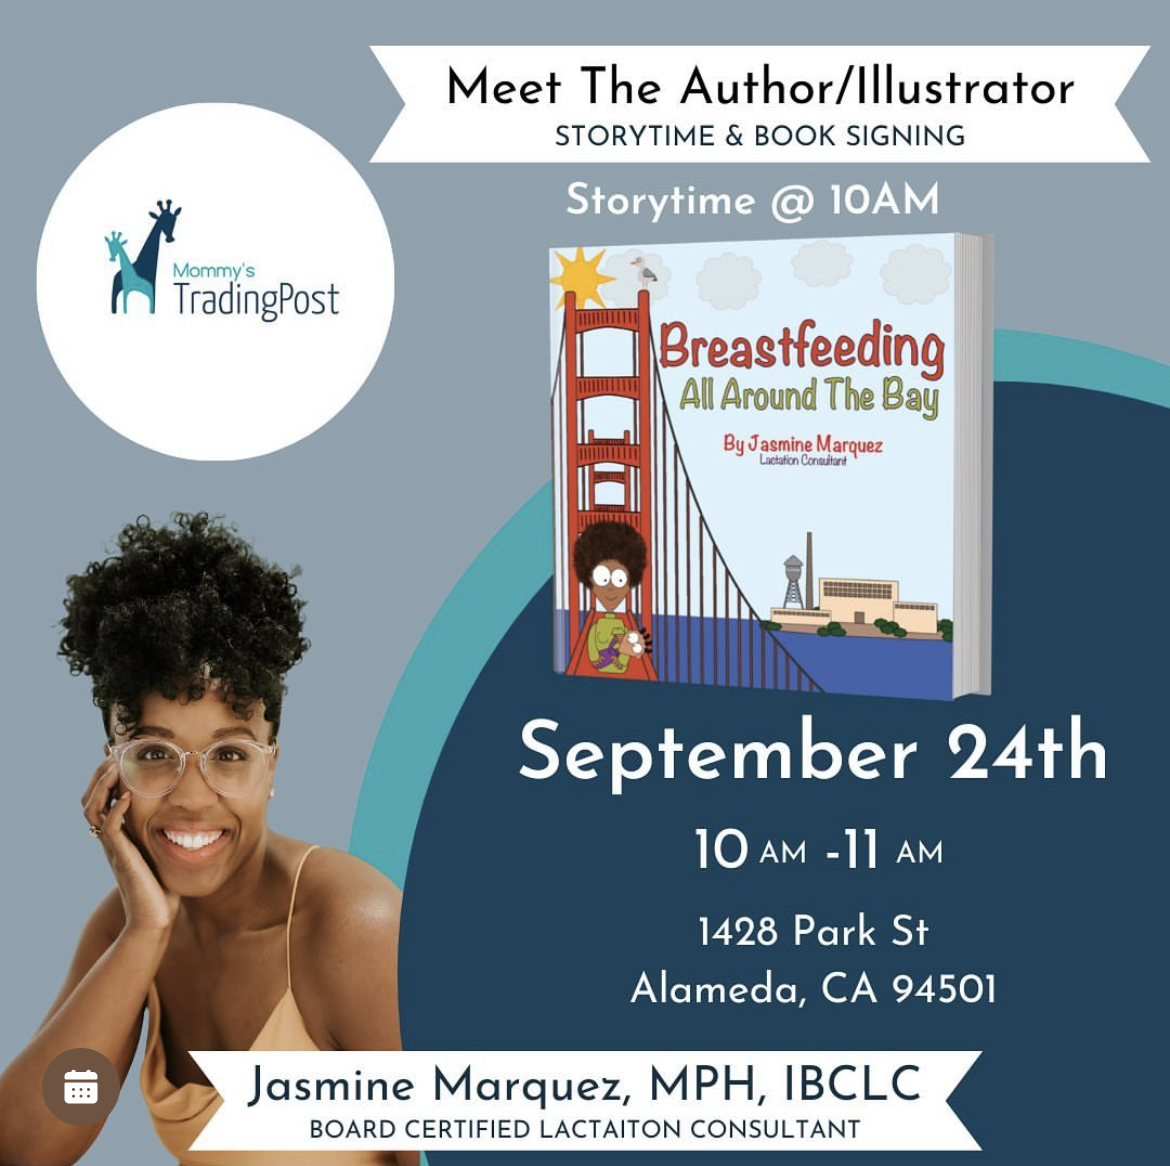 Meet the Author Storytime & Signing with Jasmine Marquez @ MTP